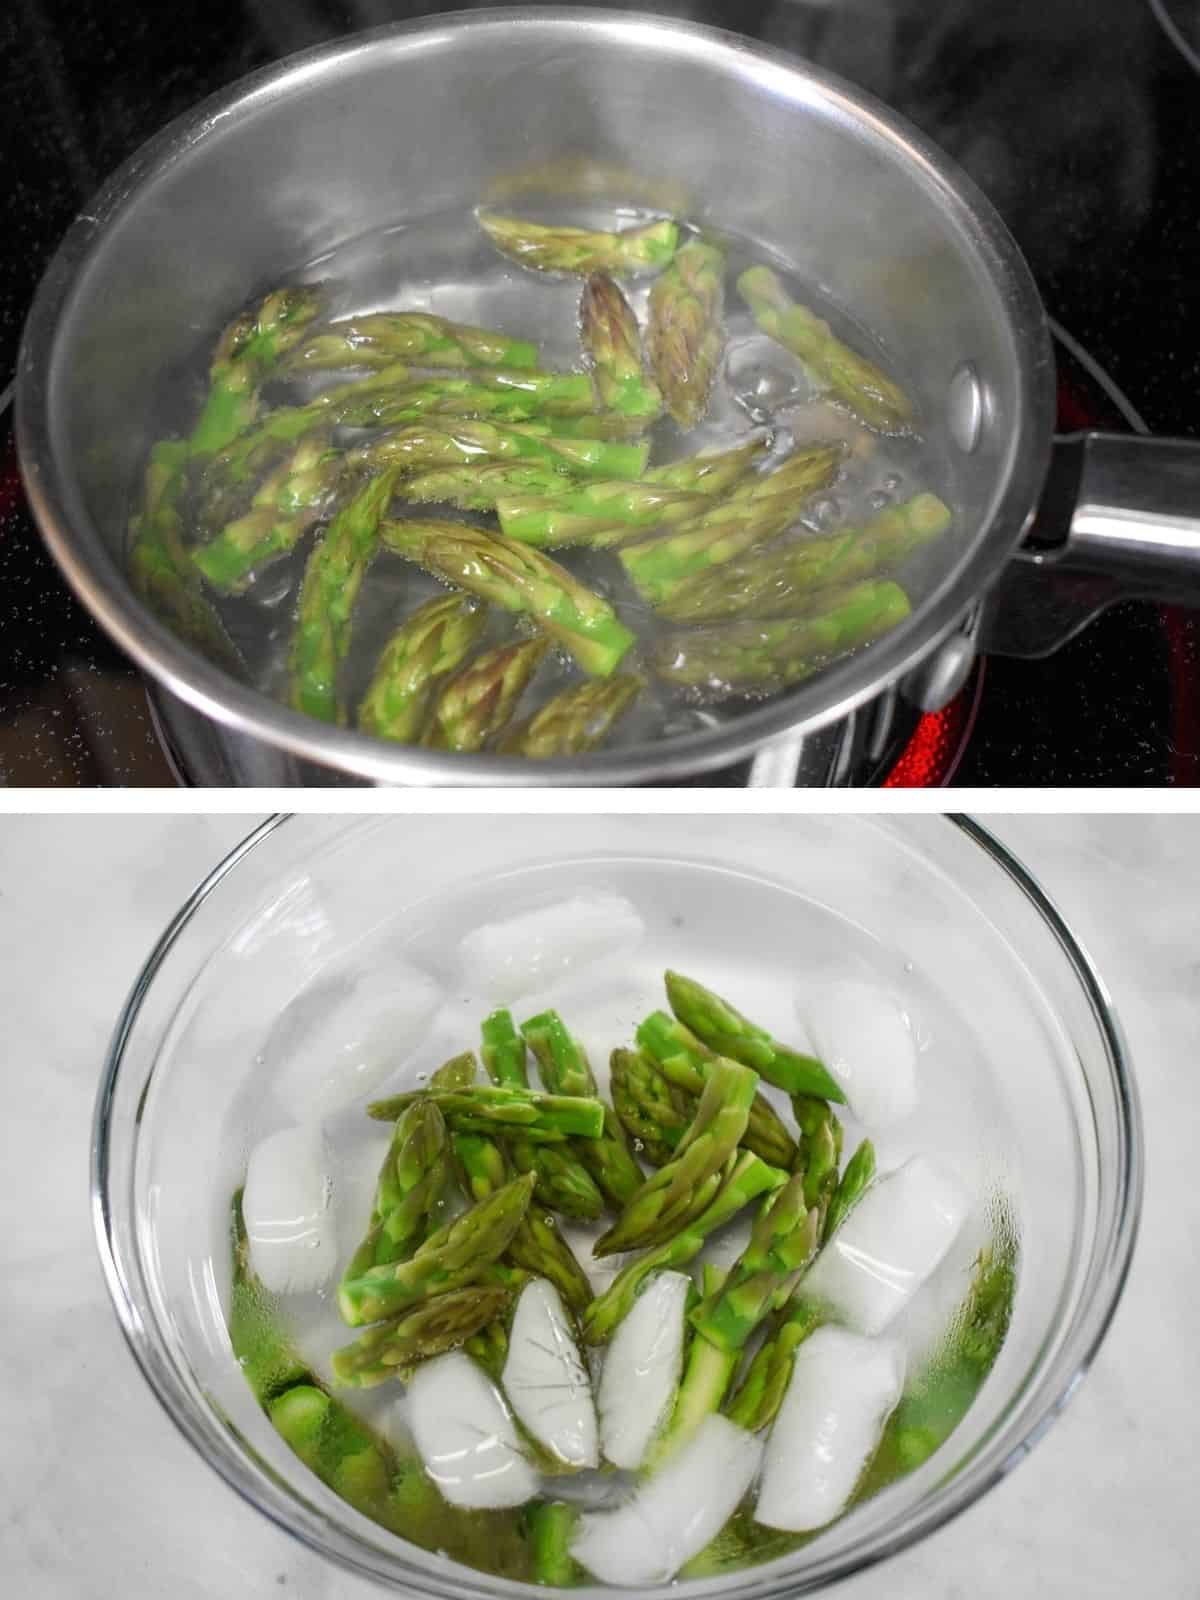 A collage showing two images, the top one is asparagus tips boiling in a small saucepan. The bottom one is the asparagus tips in a bowl of ice water.